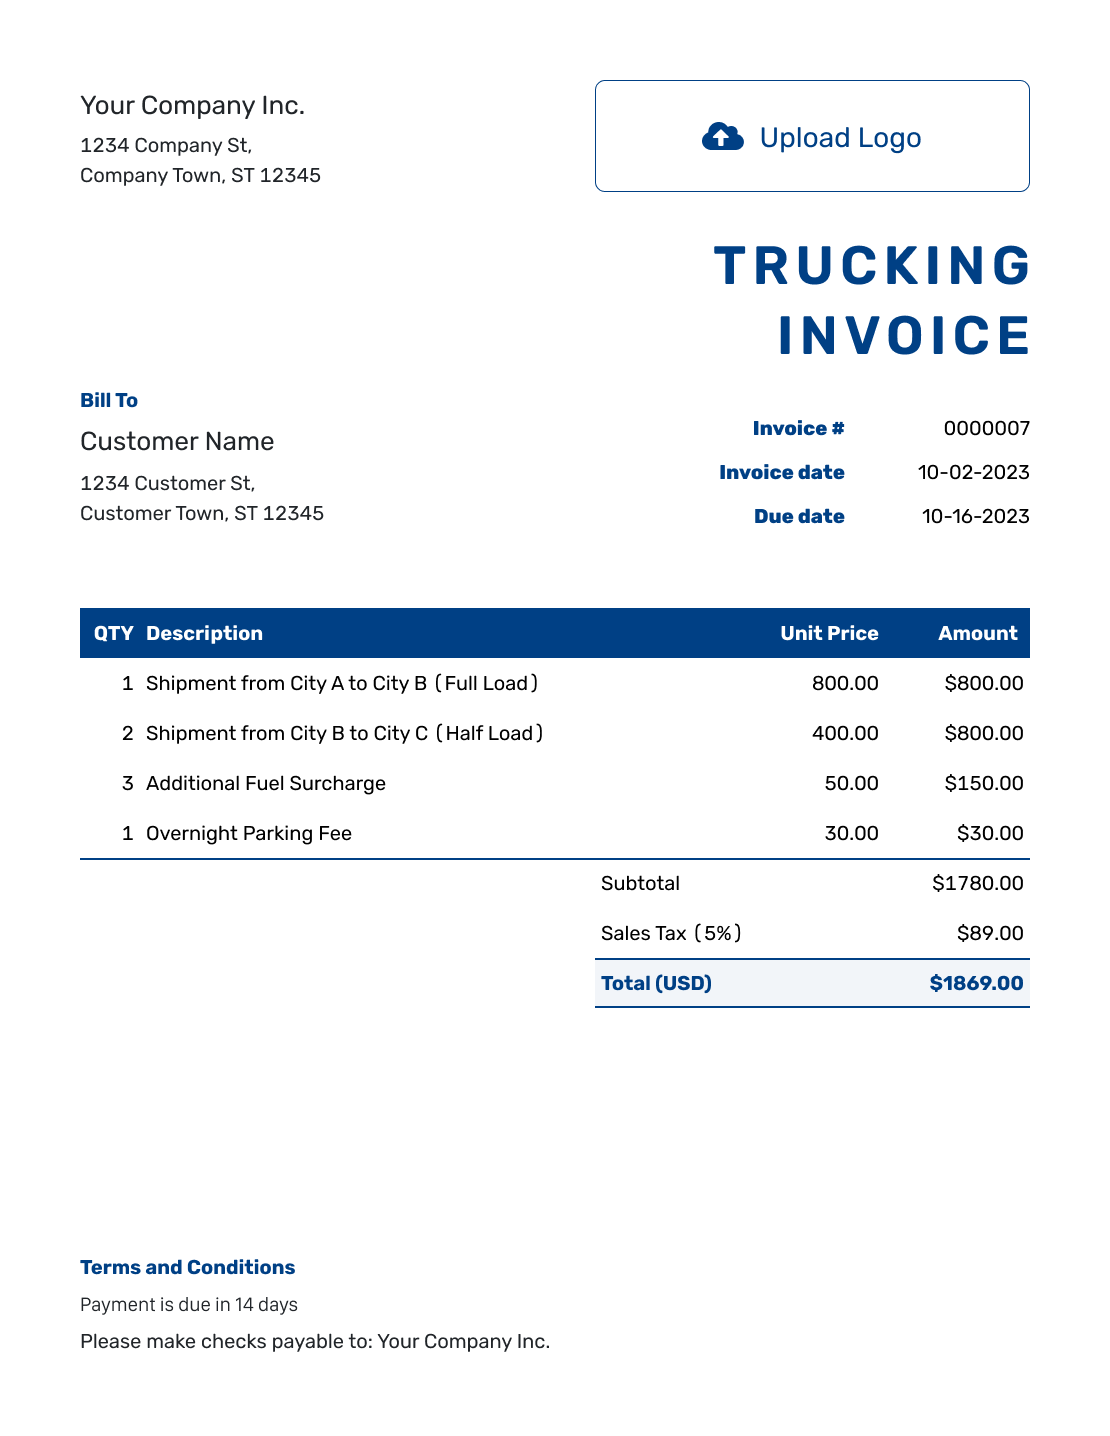 Sample Trucking Invoice Template